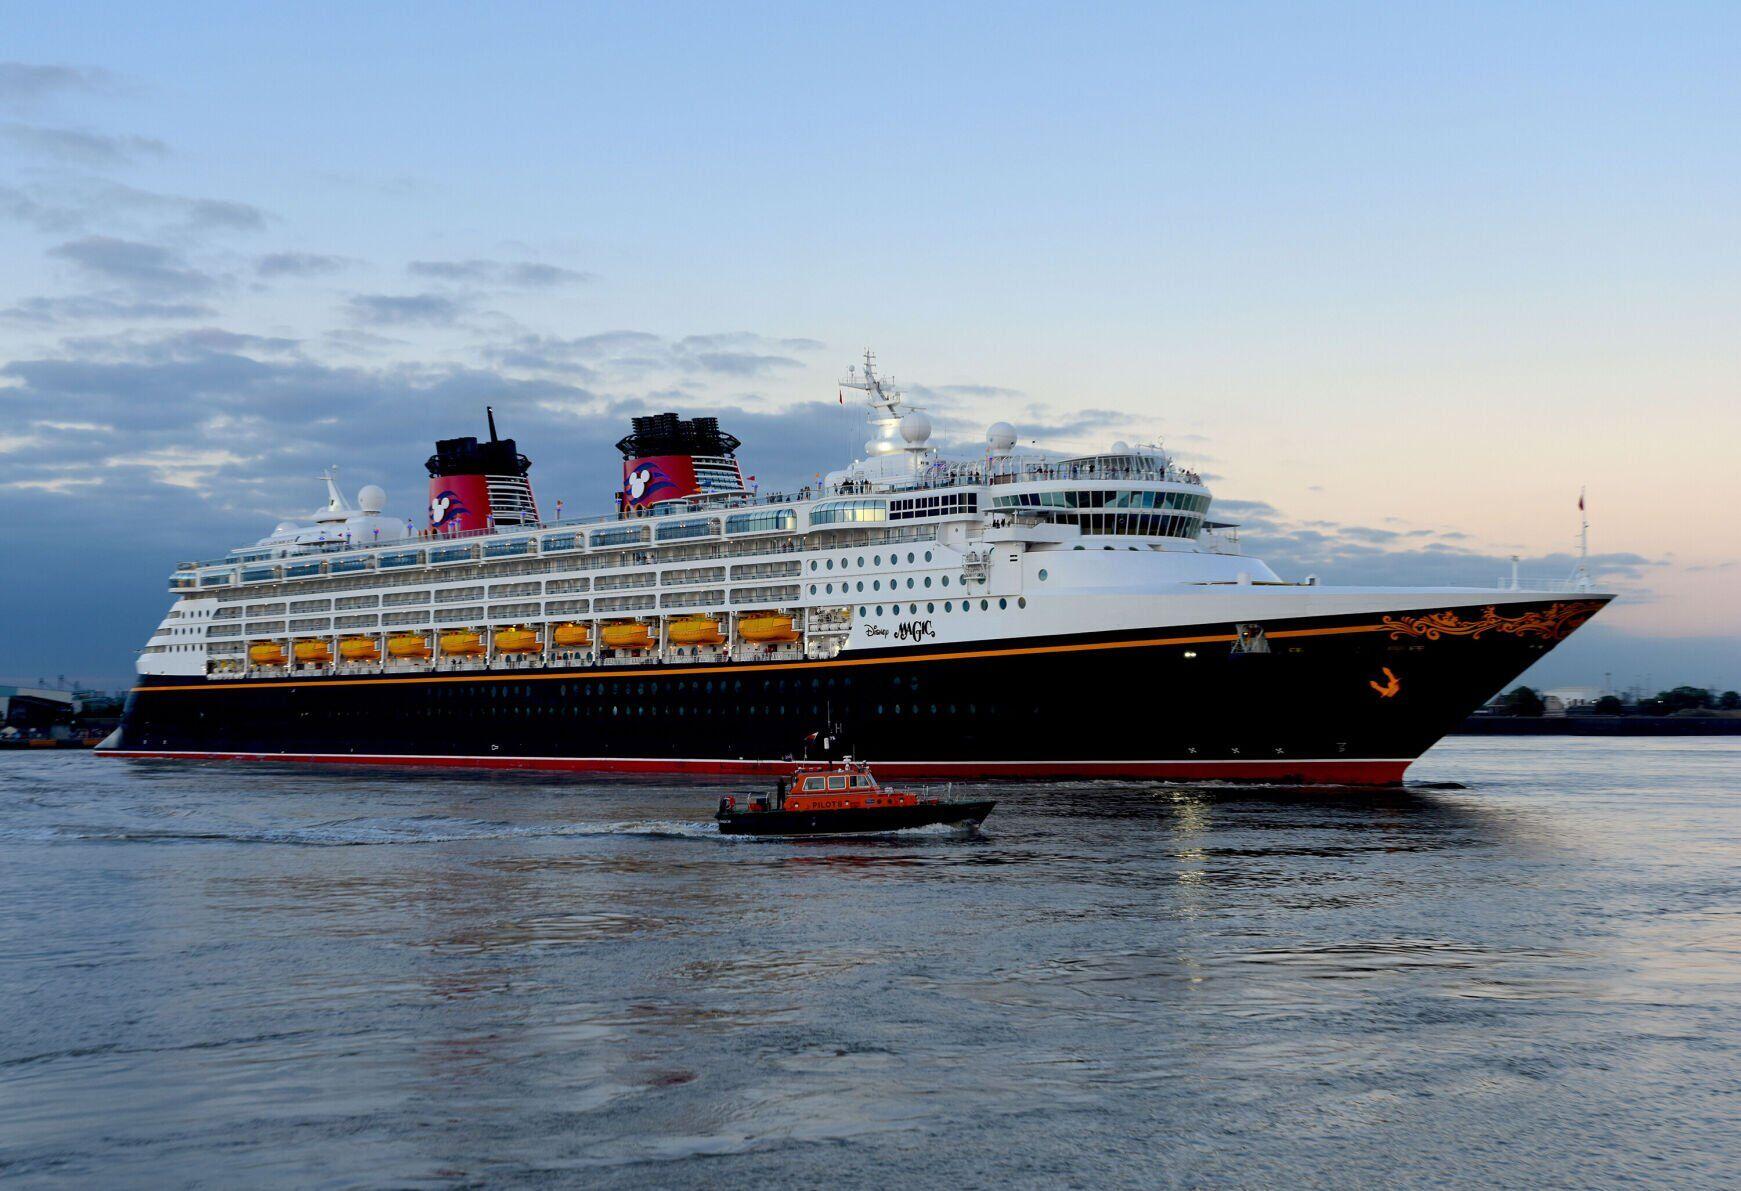 Disney cruises will require passengers ages 5 and up to be vaccinated